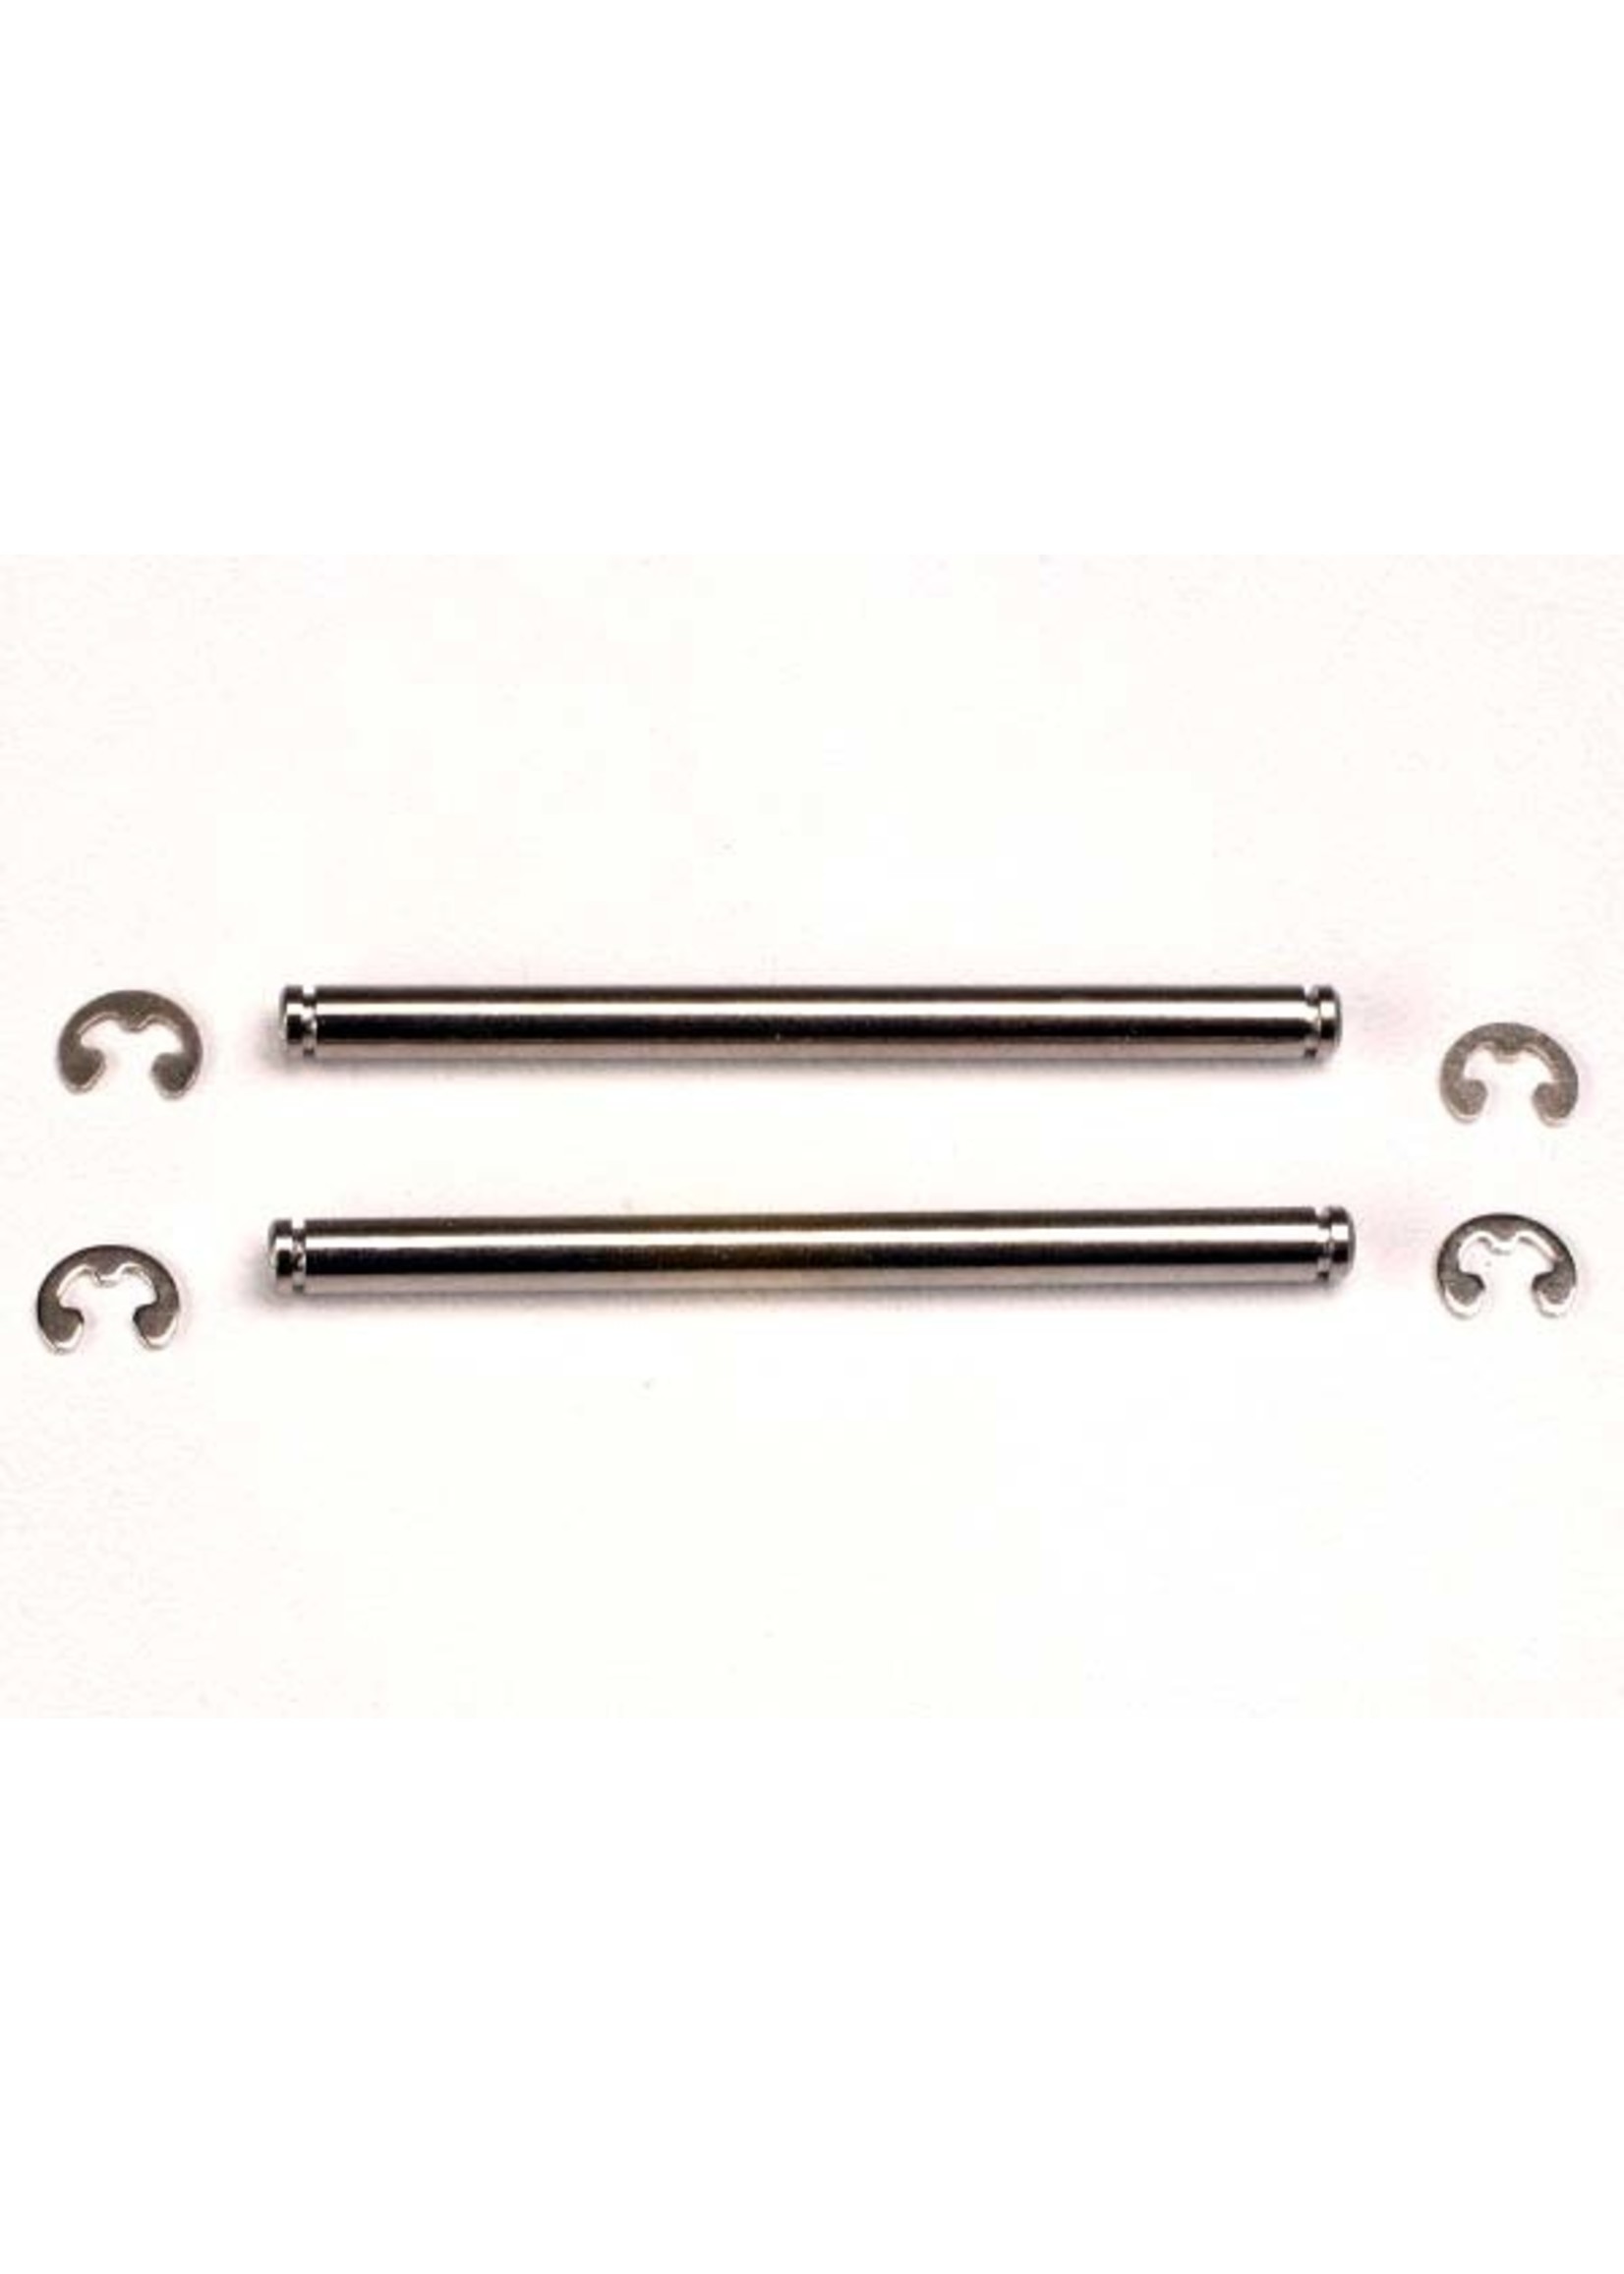 Traxxas 2640 - 44mm Suspension Pins with E-Clips (2)